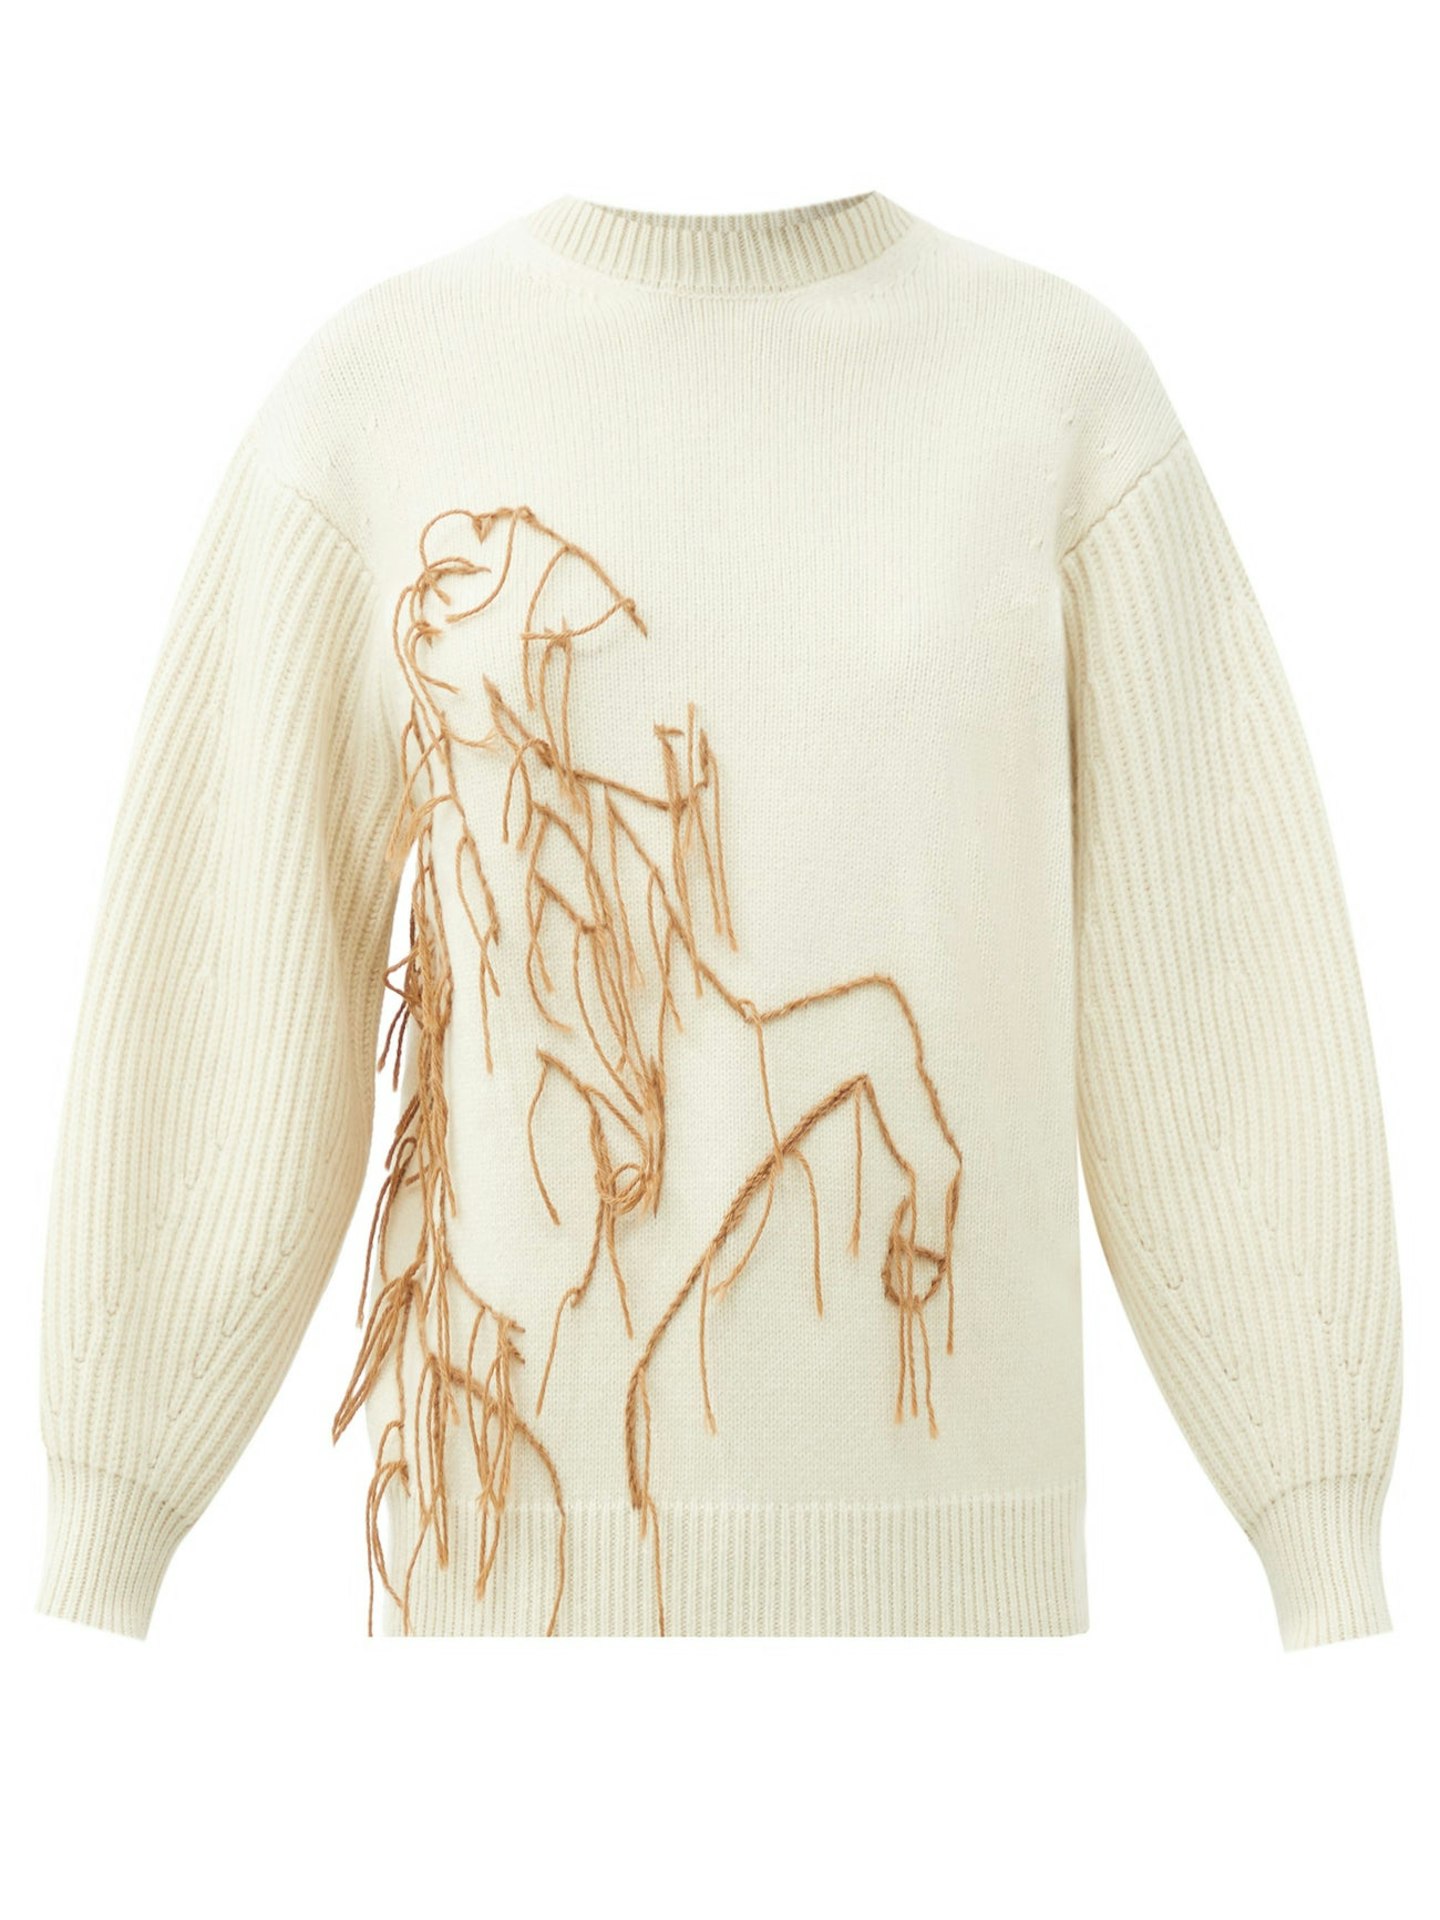 Ssu014dne, Joanie Embroidered Recycled-Cashmere Sweater, £473